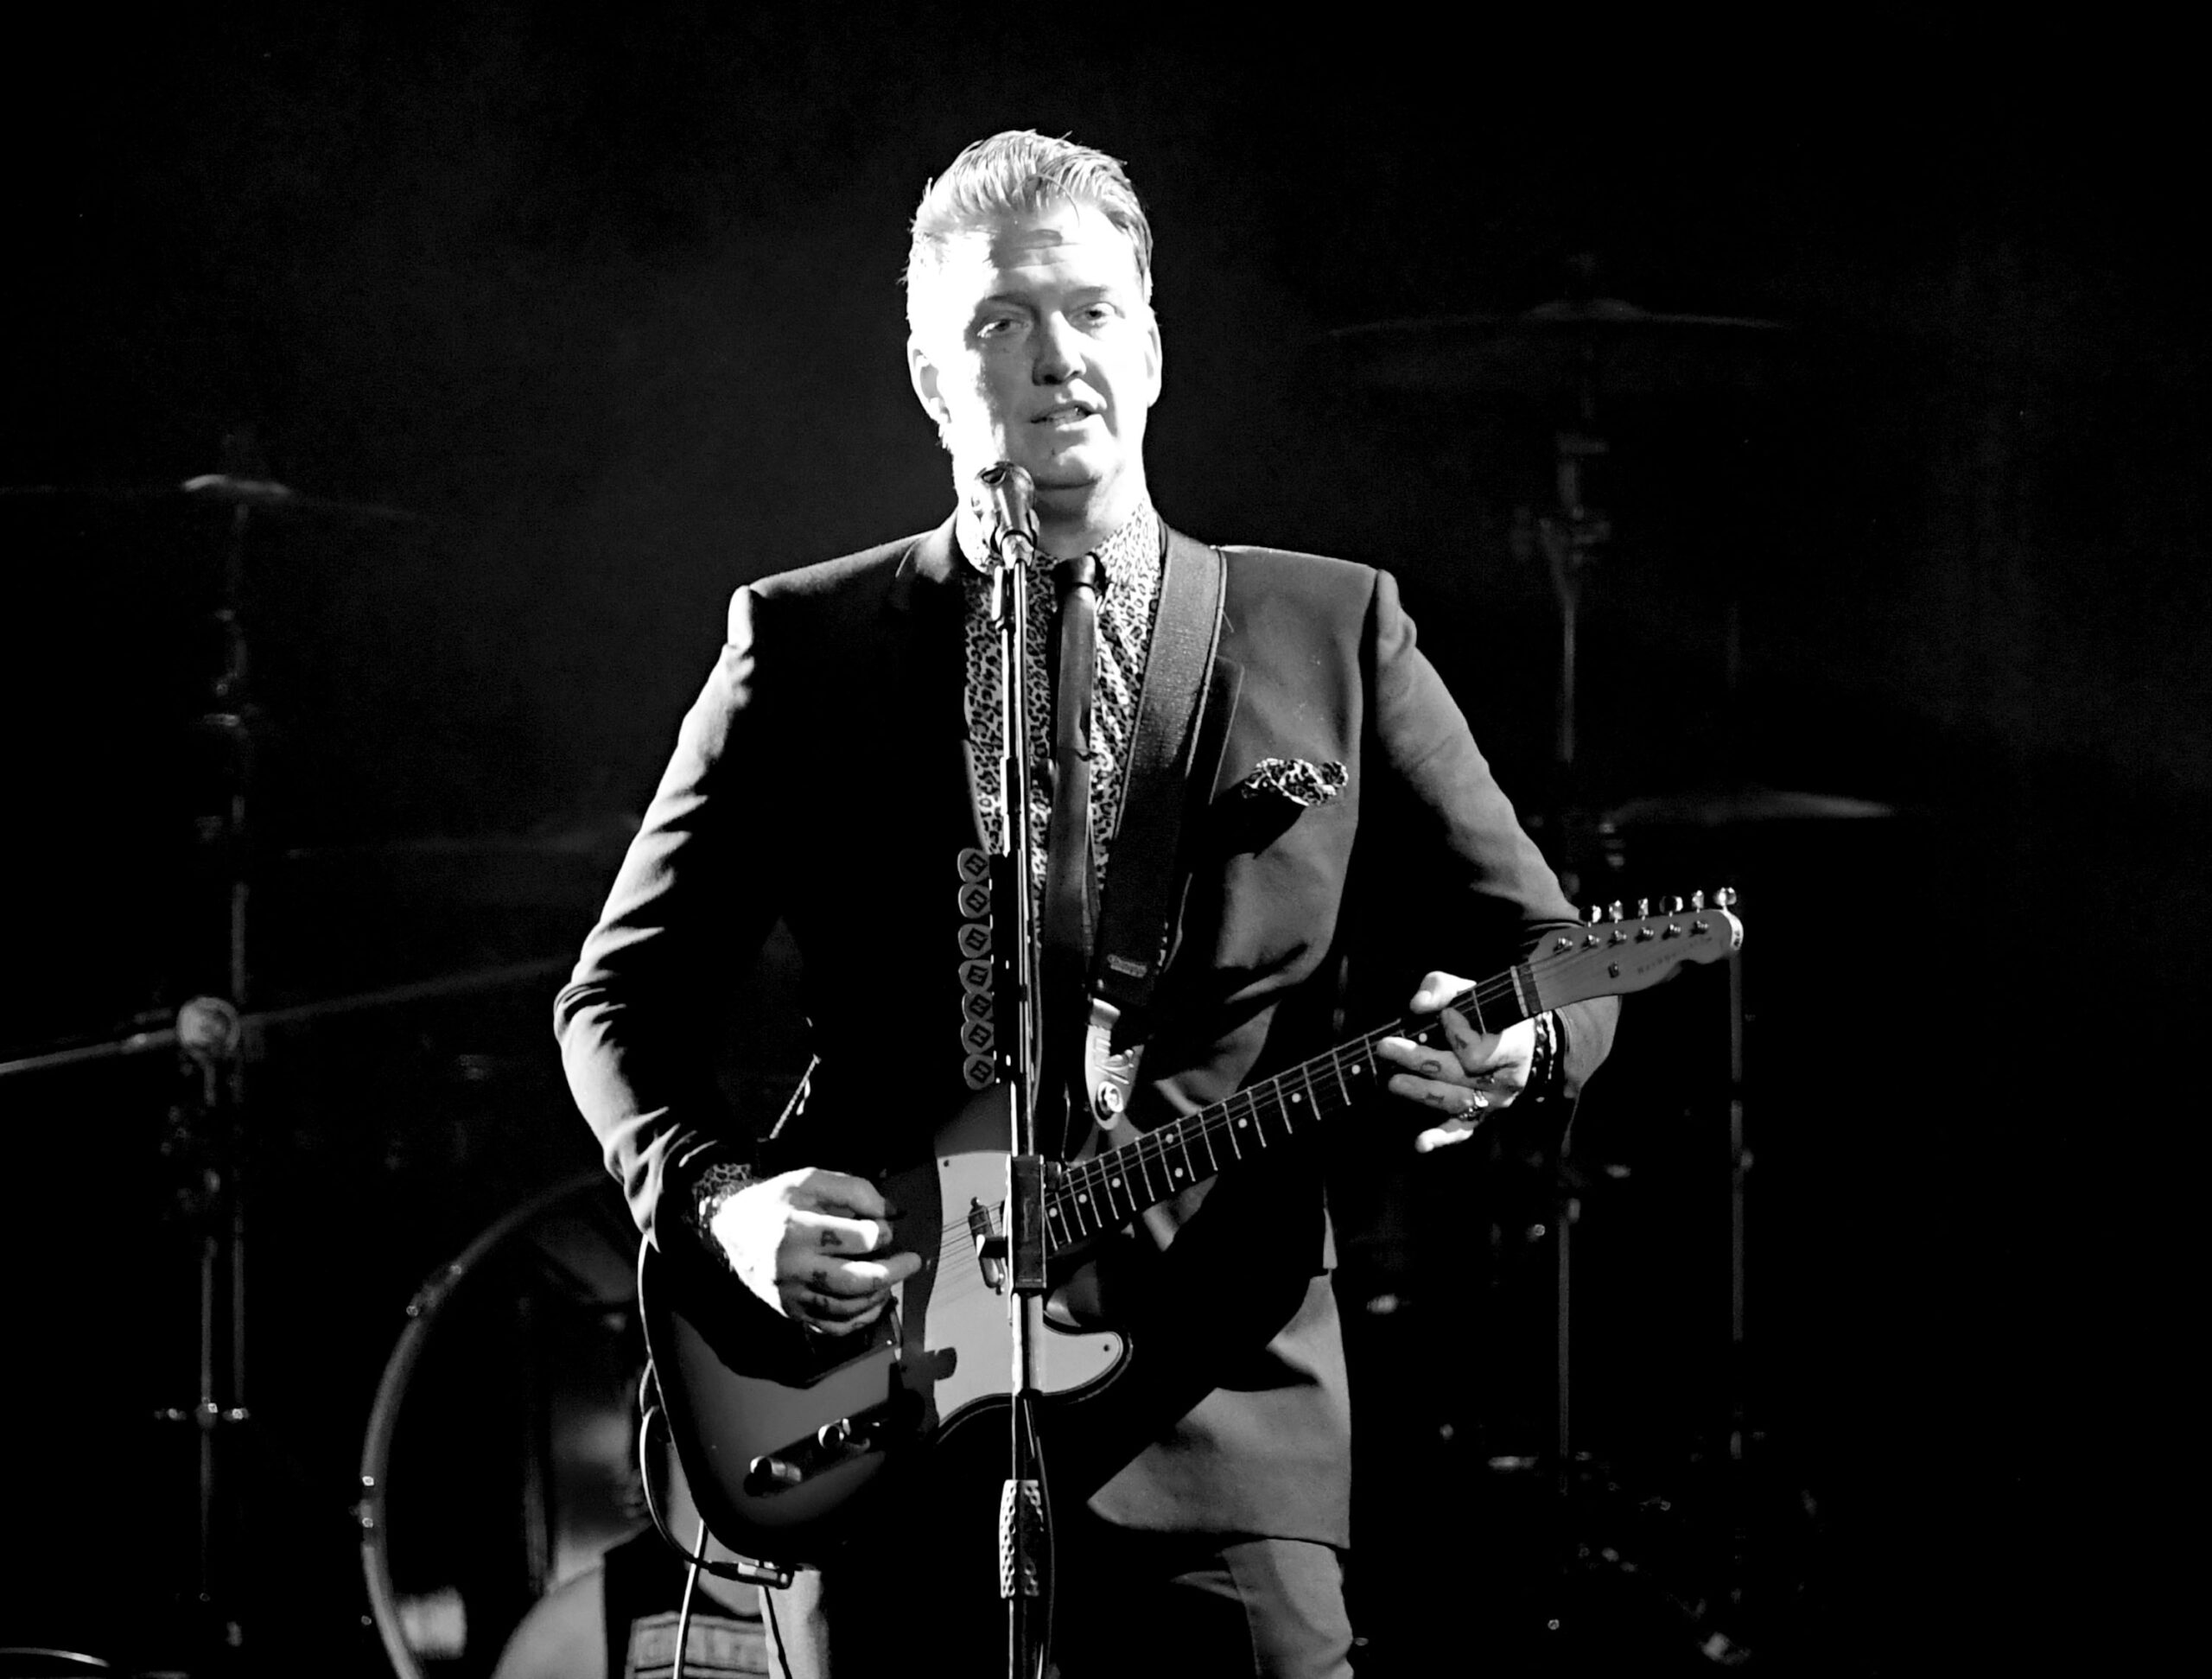 Josh Homme, His Children, and Parents Granted Restraining Order Against Brody Dalle